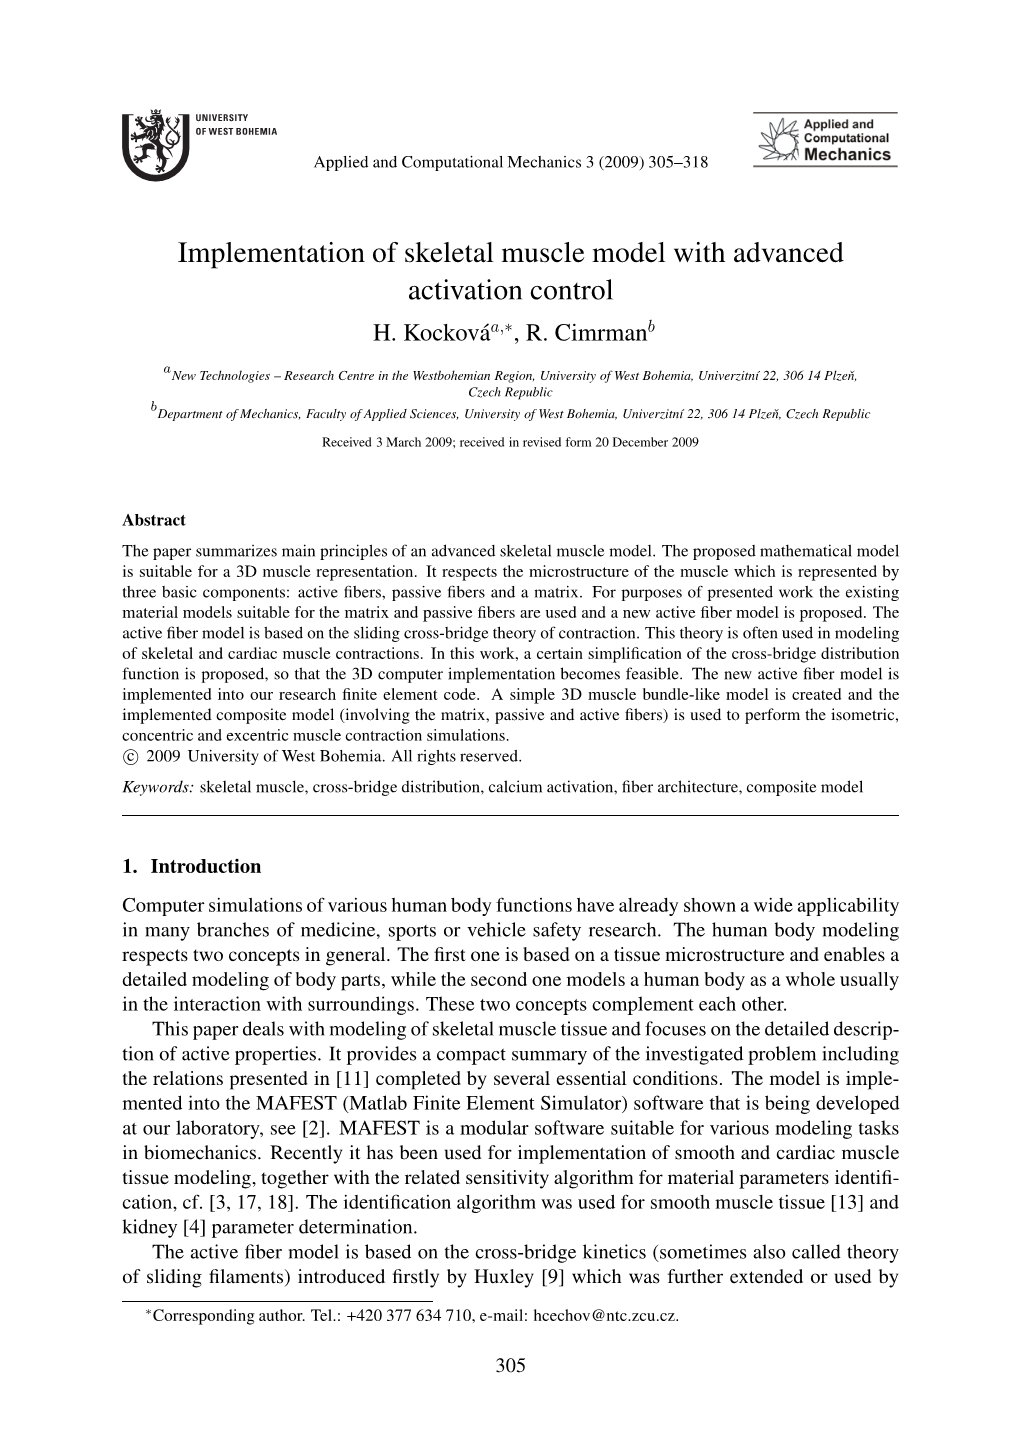 Implementation of Skeletal Muscle Model with Advanced Activation Control H